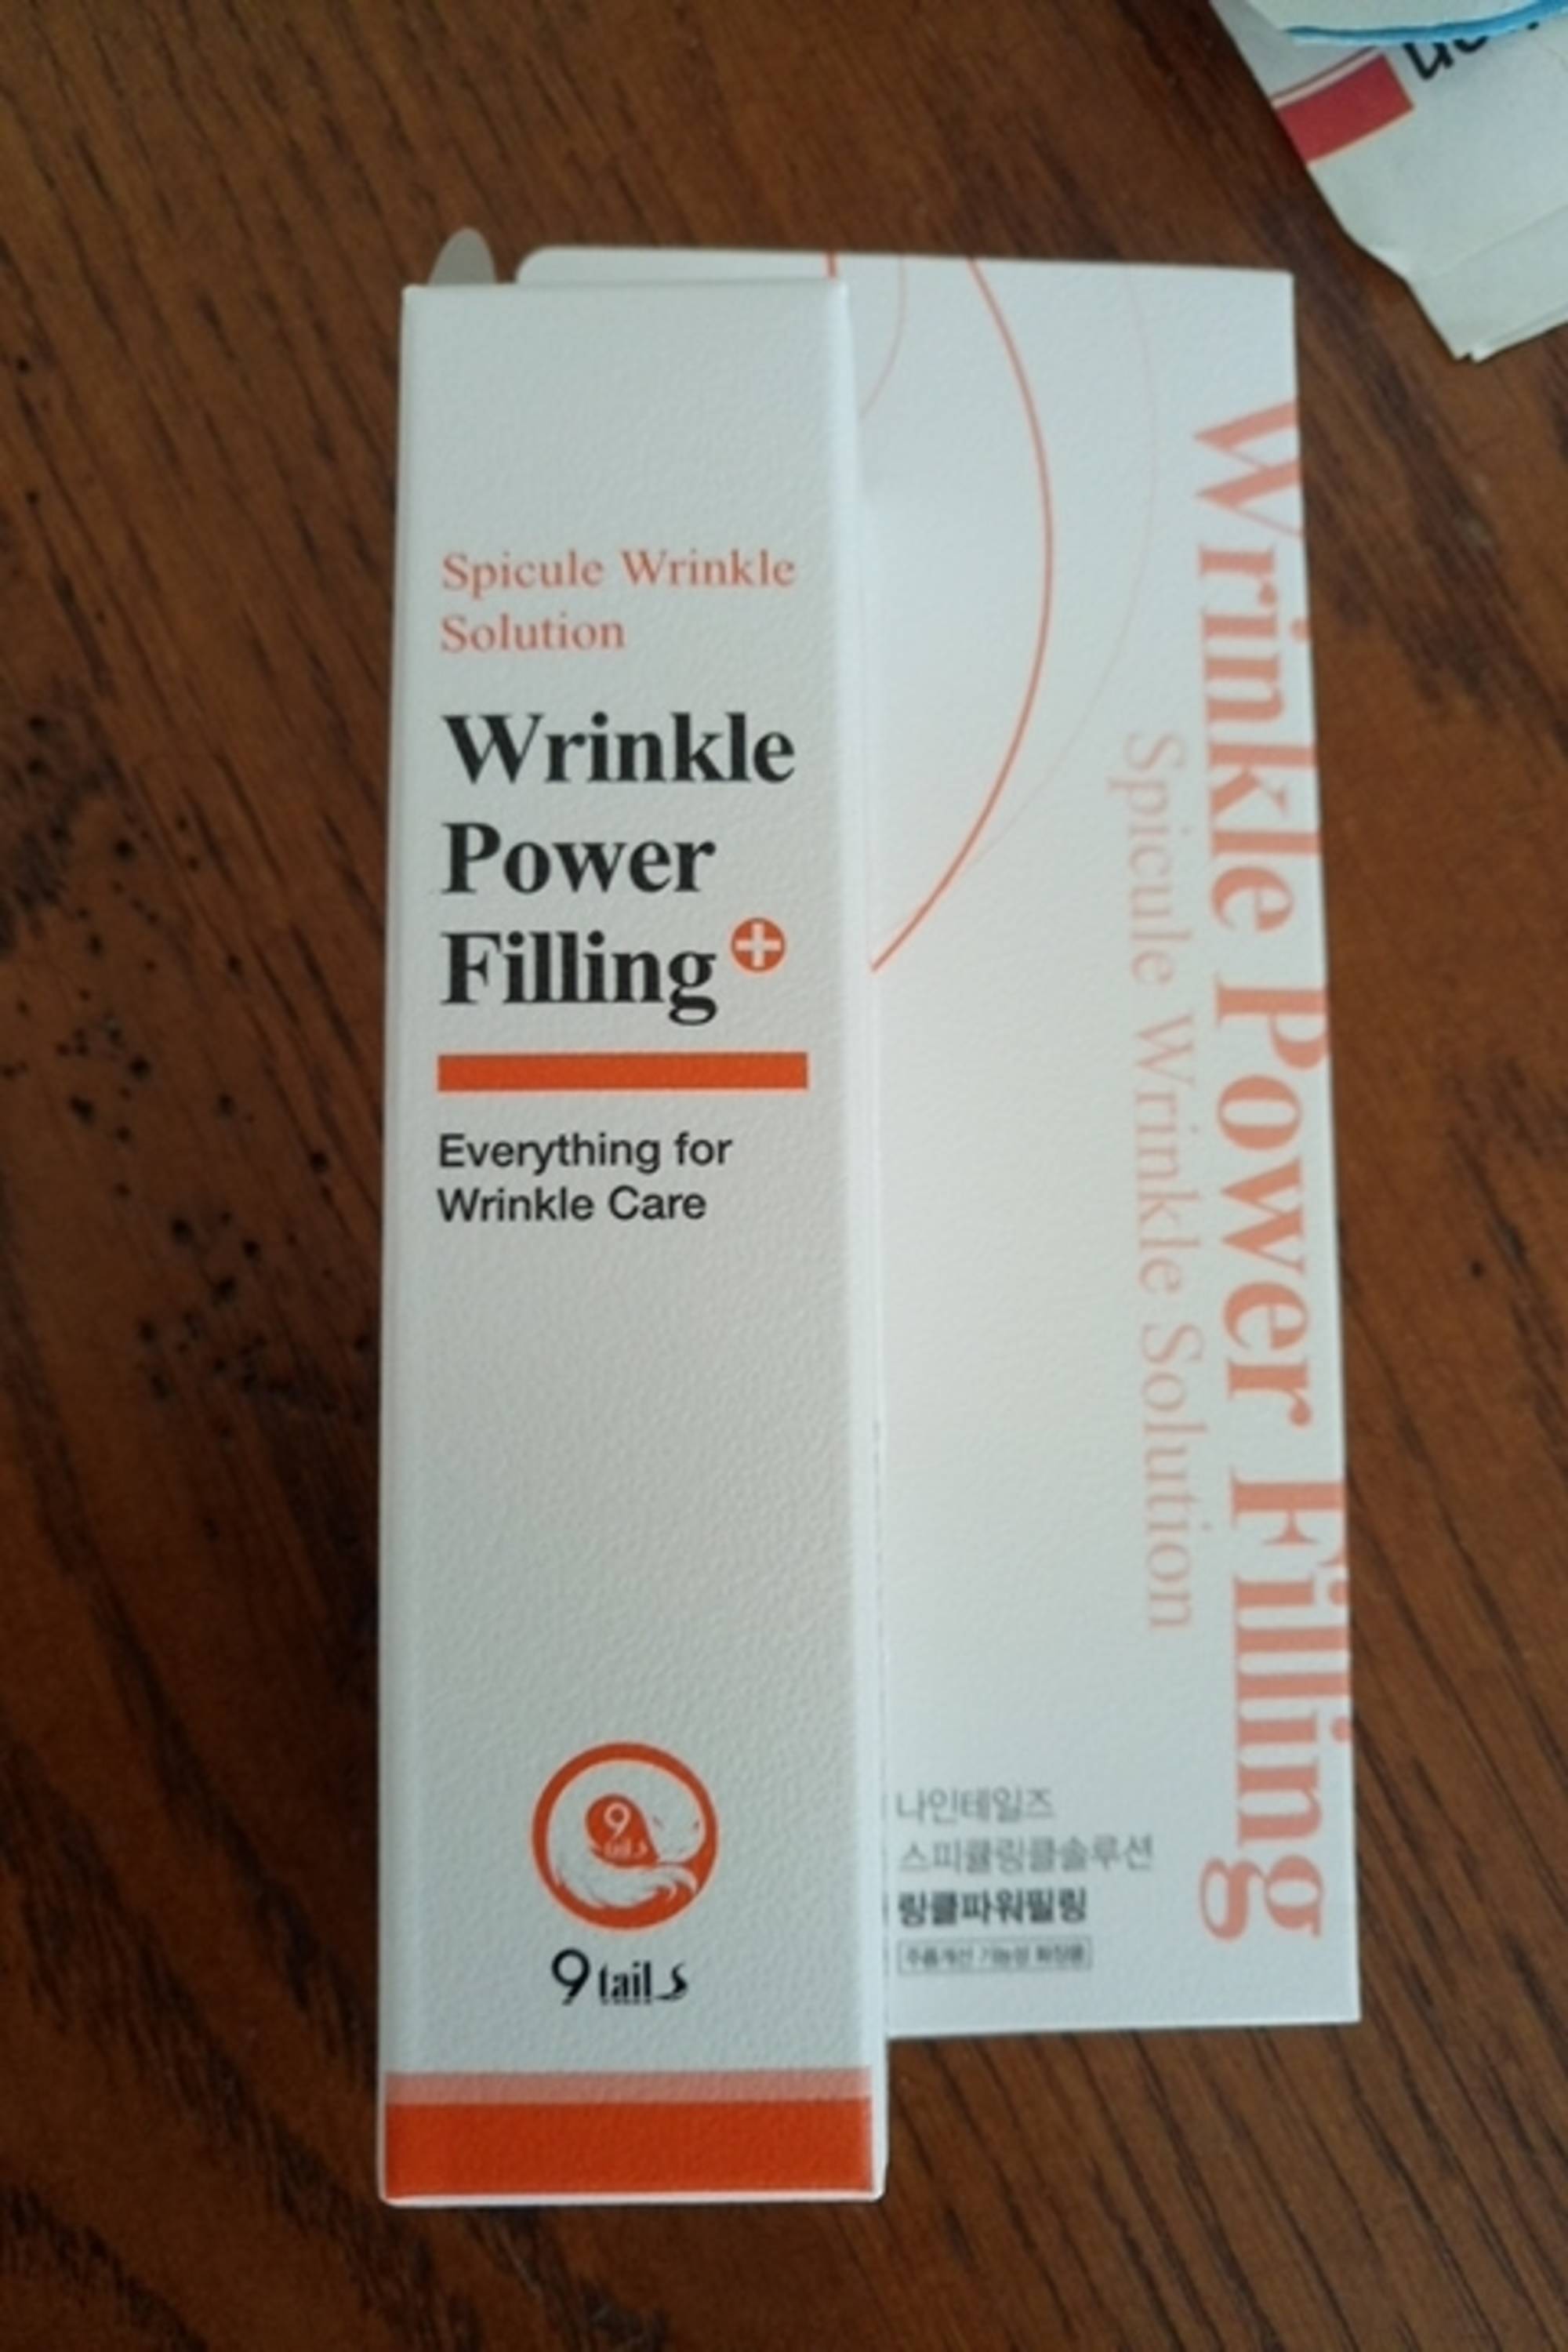 9 TAILS - Wrinkle power filling